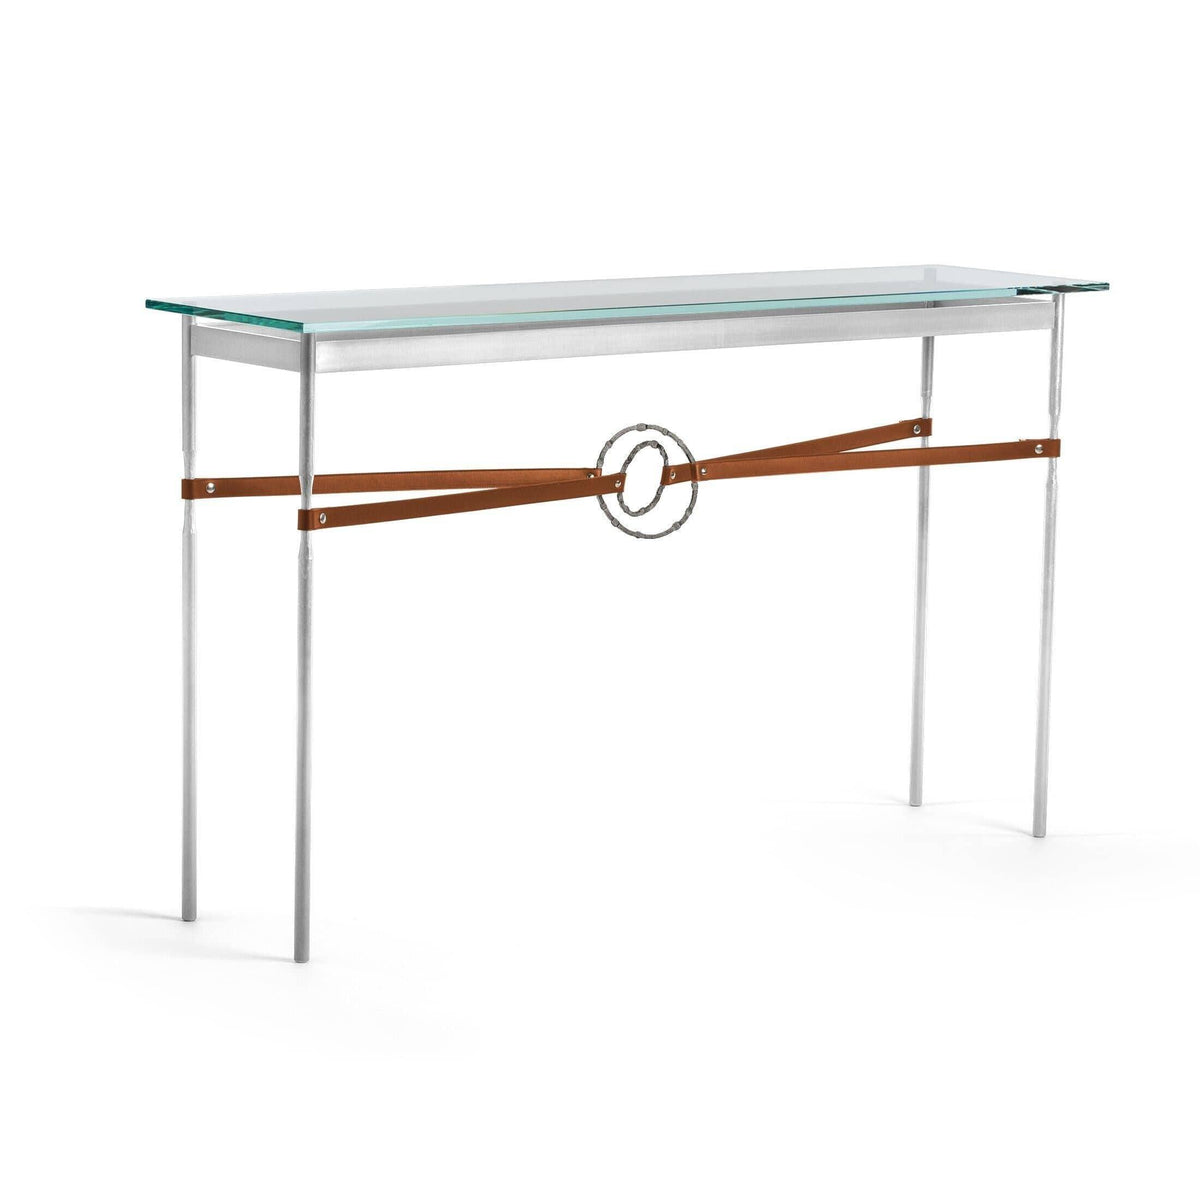 Hubbardton Forge - Equus Chestnut Leather Console Table - 750118-85-20-LC-VA0714 | Montreal Lighting & Hardware